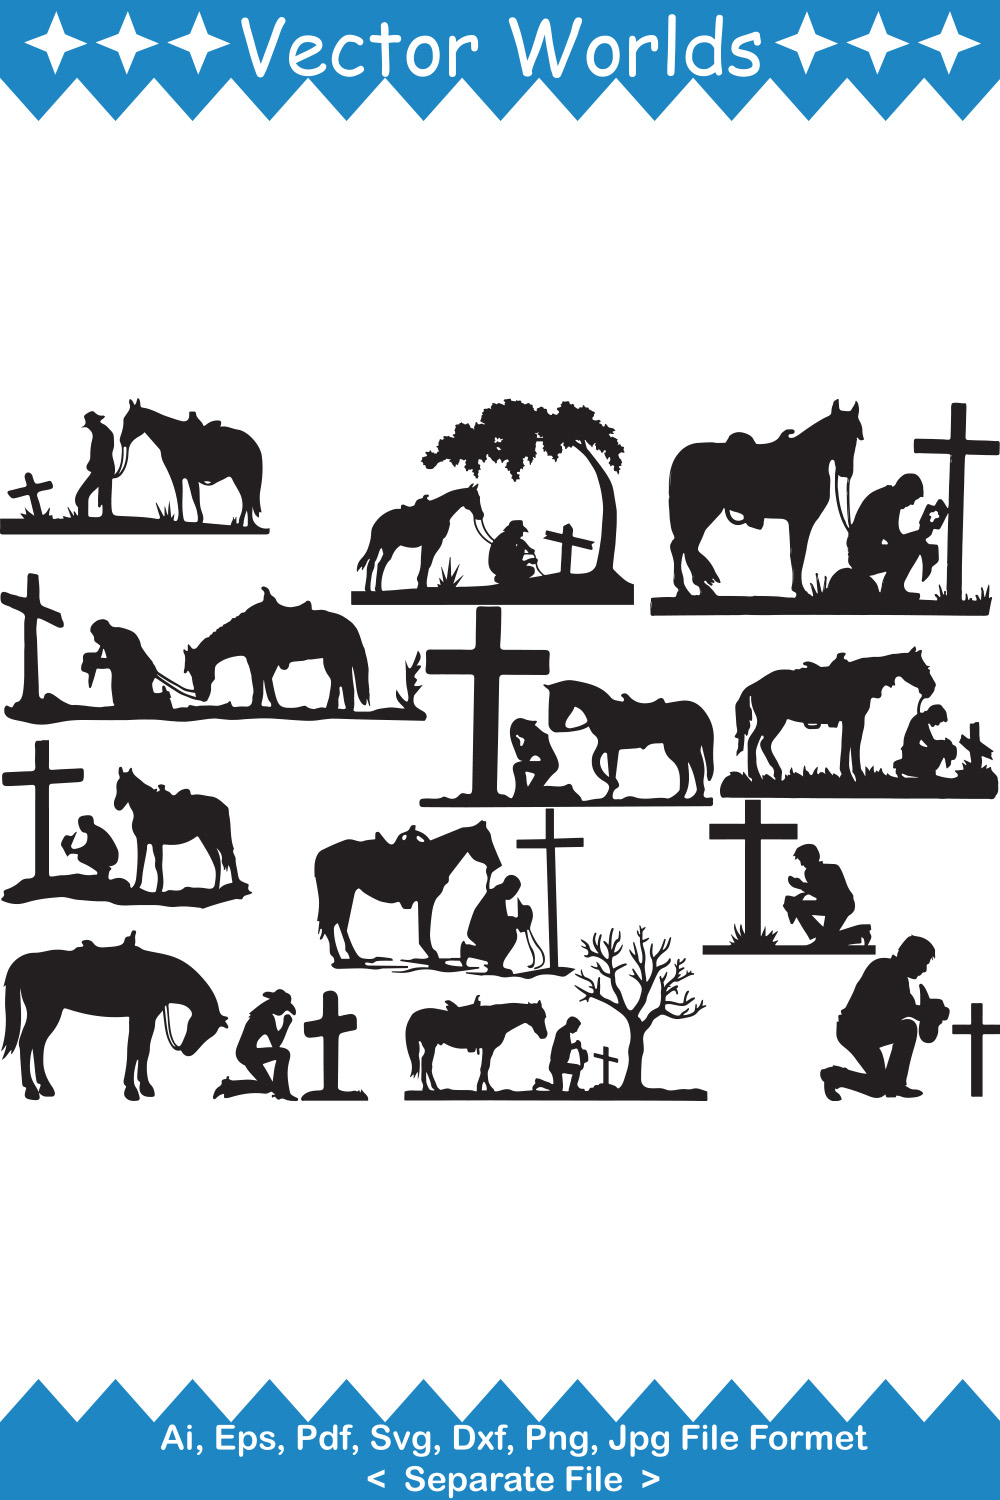 Set of silhouettes of farm animals and people.